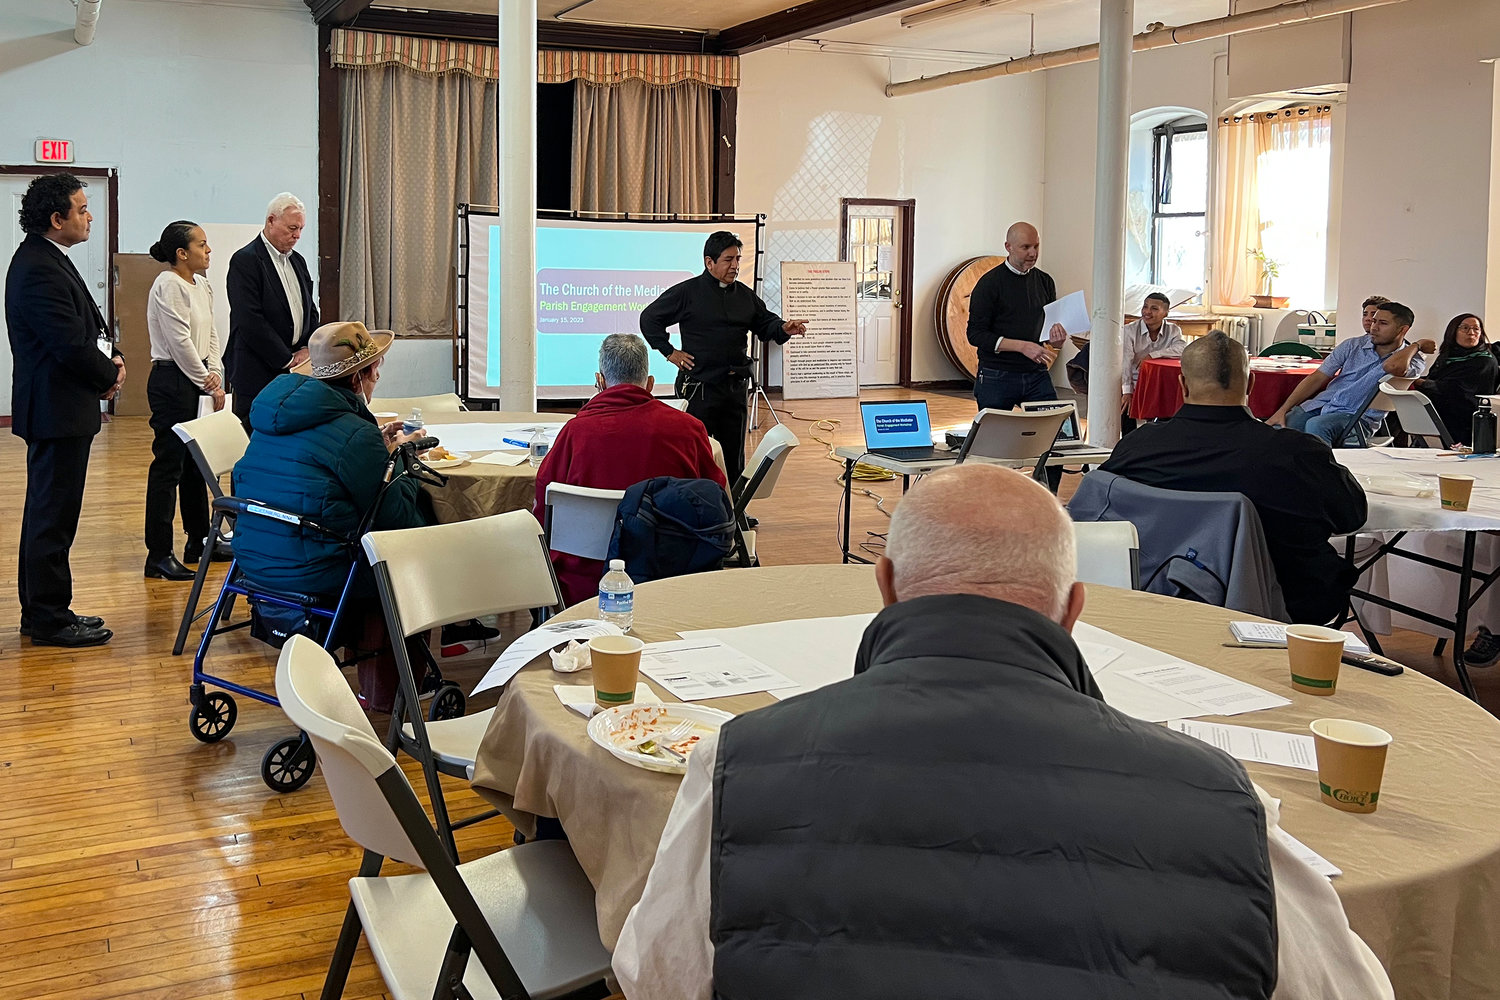 Priest-in-Charge Luis Enrique Gomez, center, makes opening remarks at the parish engagement workshop that took place in the basement of the Church of the Mediator on Kingsbridge Avenue on Jan. 15.